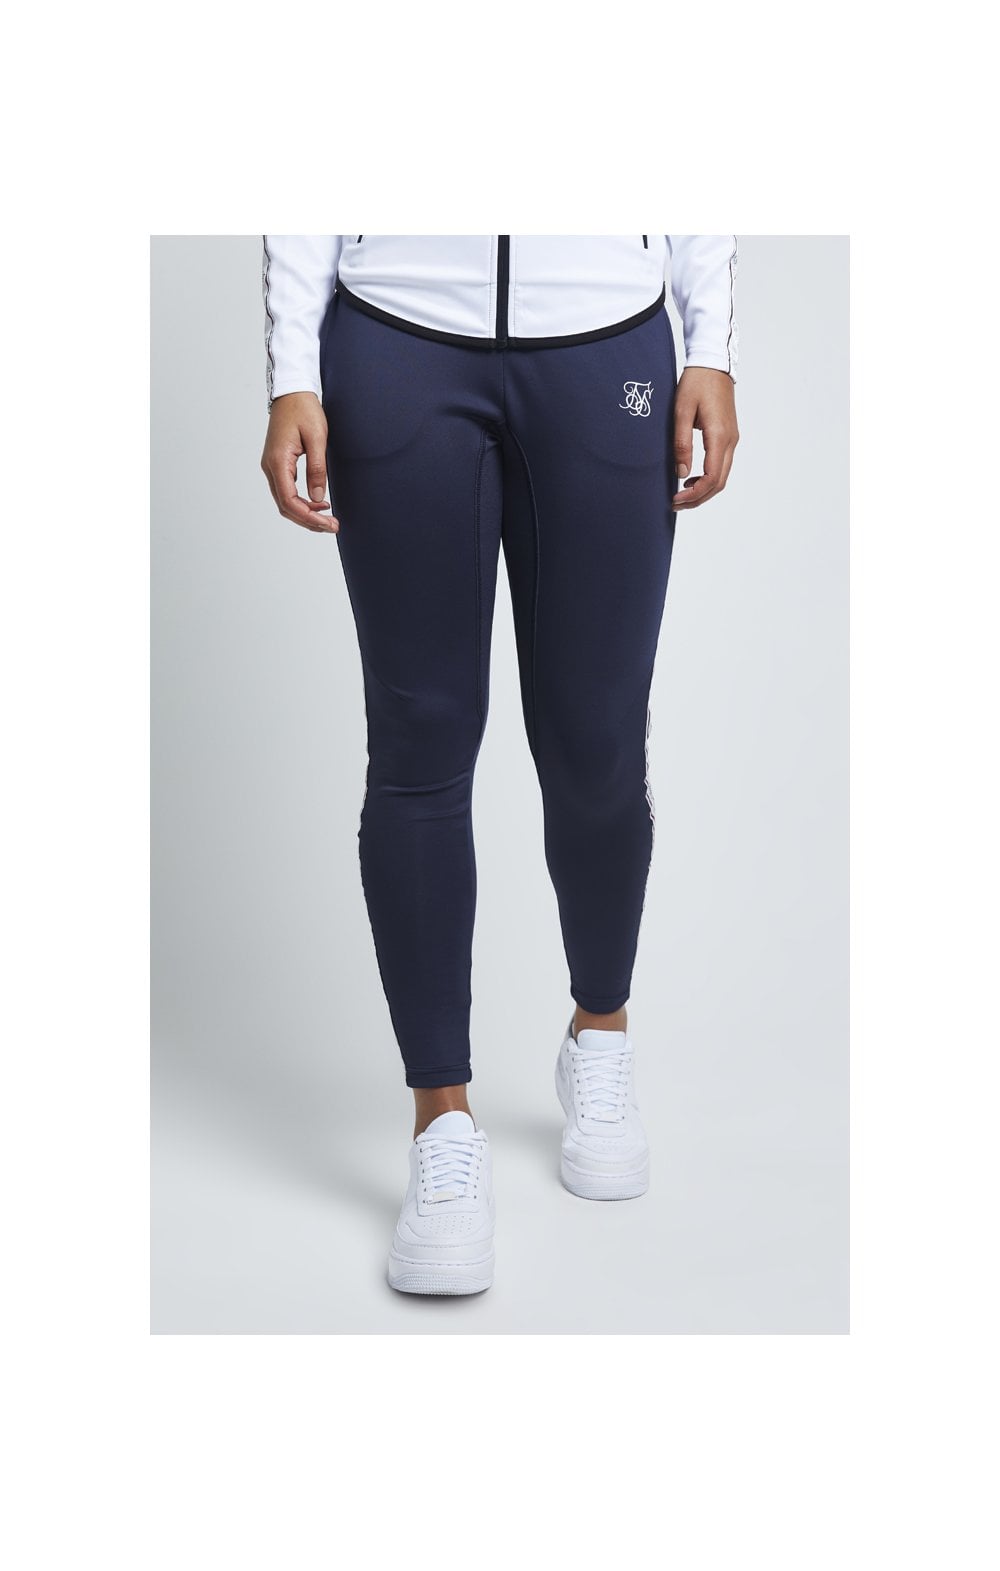 Load image into Gallery viewer, SikSilk Tape Athlete Track Pants - Ebony (2)